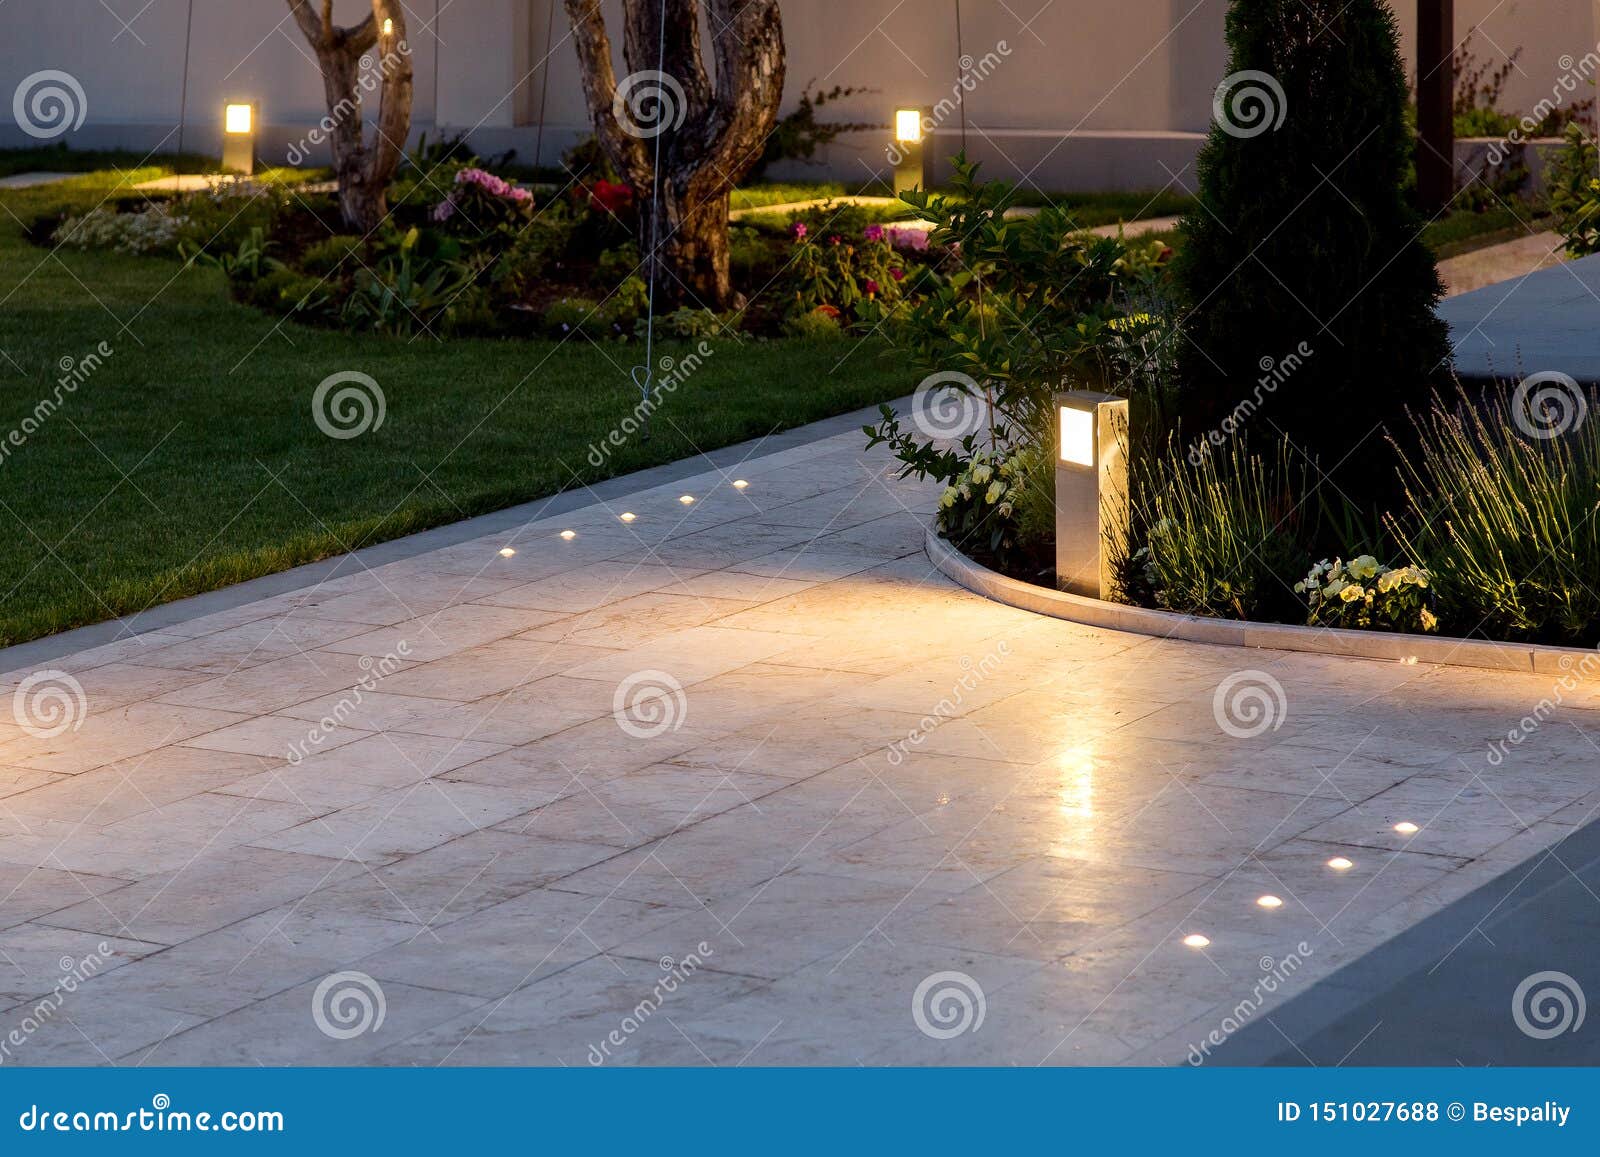 marble tile playground in the backyard of flowerbeds and lawn with ground lantern.